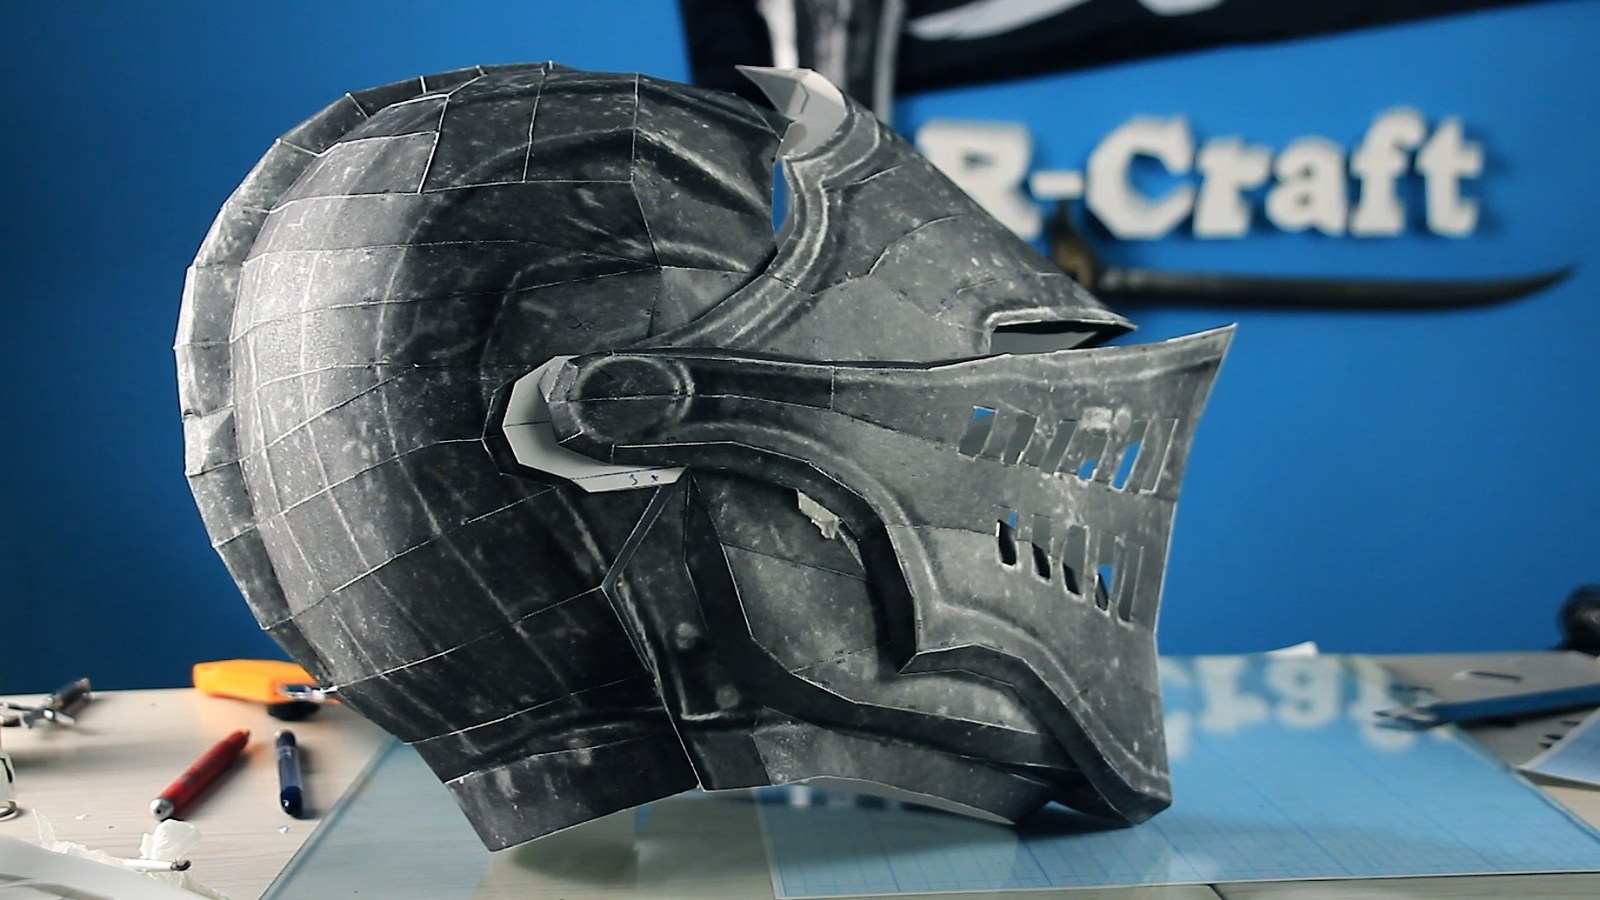 Do-it-yourself elite knight helmet from the game Dark Souls. R craft - My, Craft, Longpost, Needlework with process, Dark souls, Helmet, Cosplay, With your own hands, Video